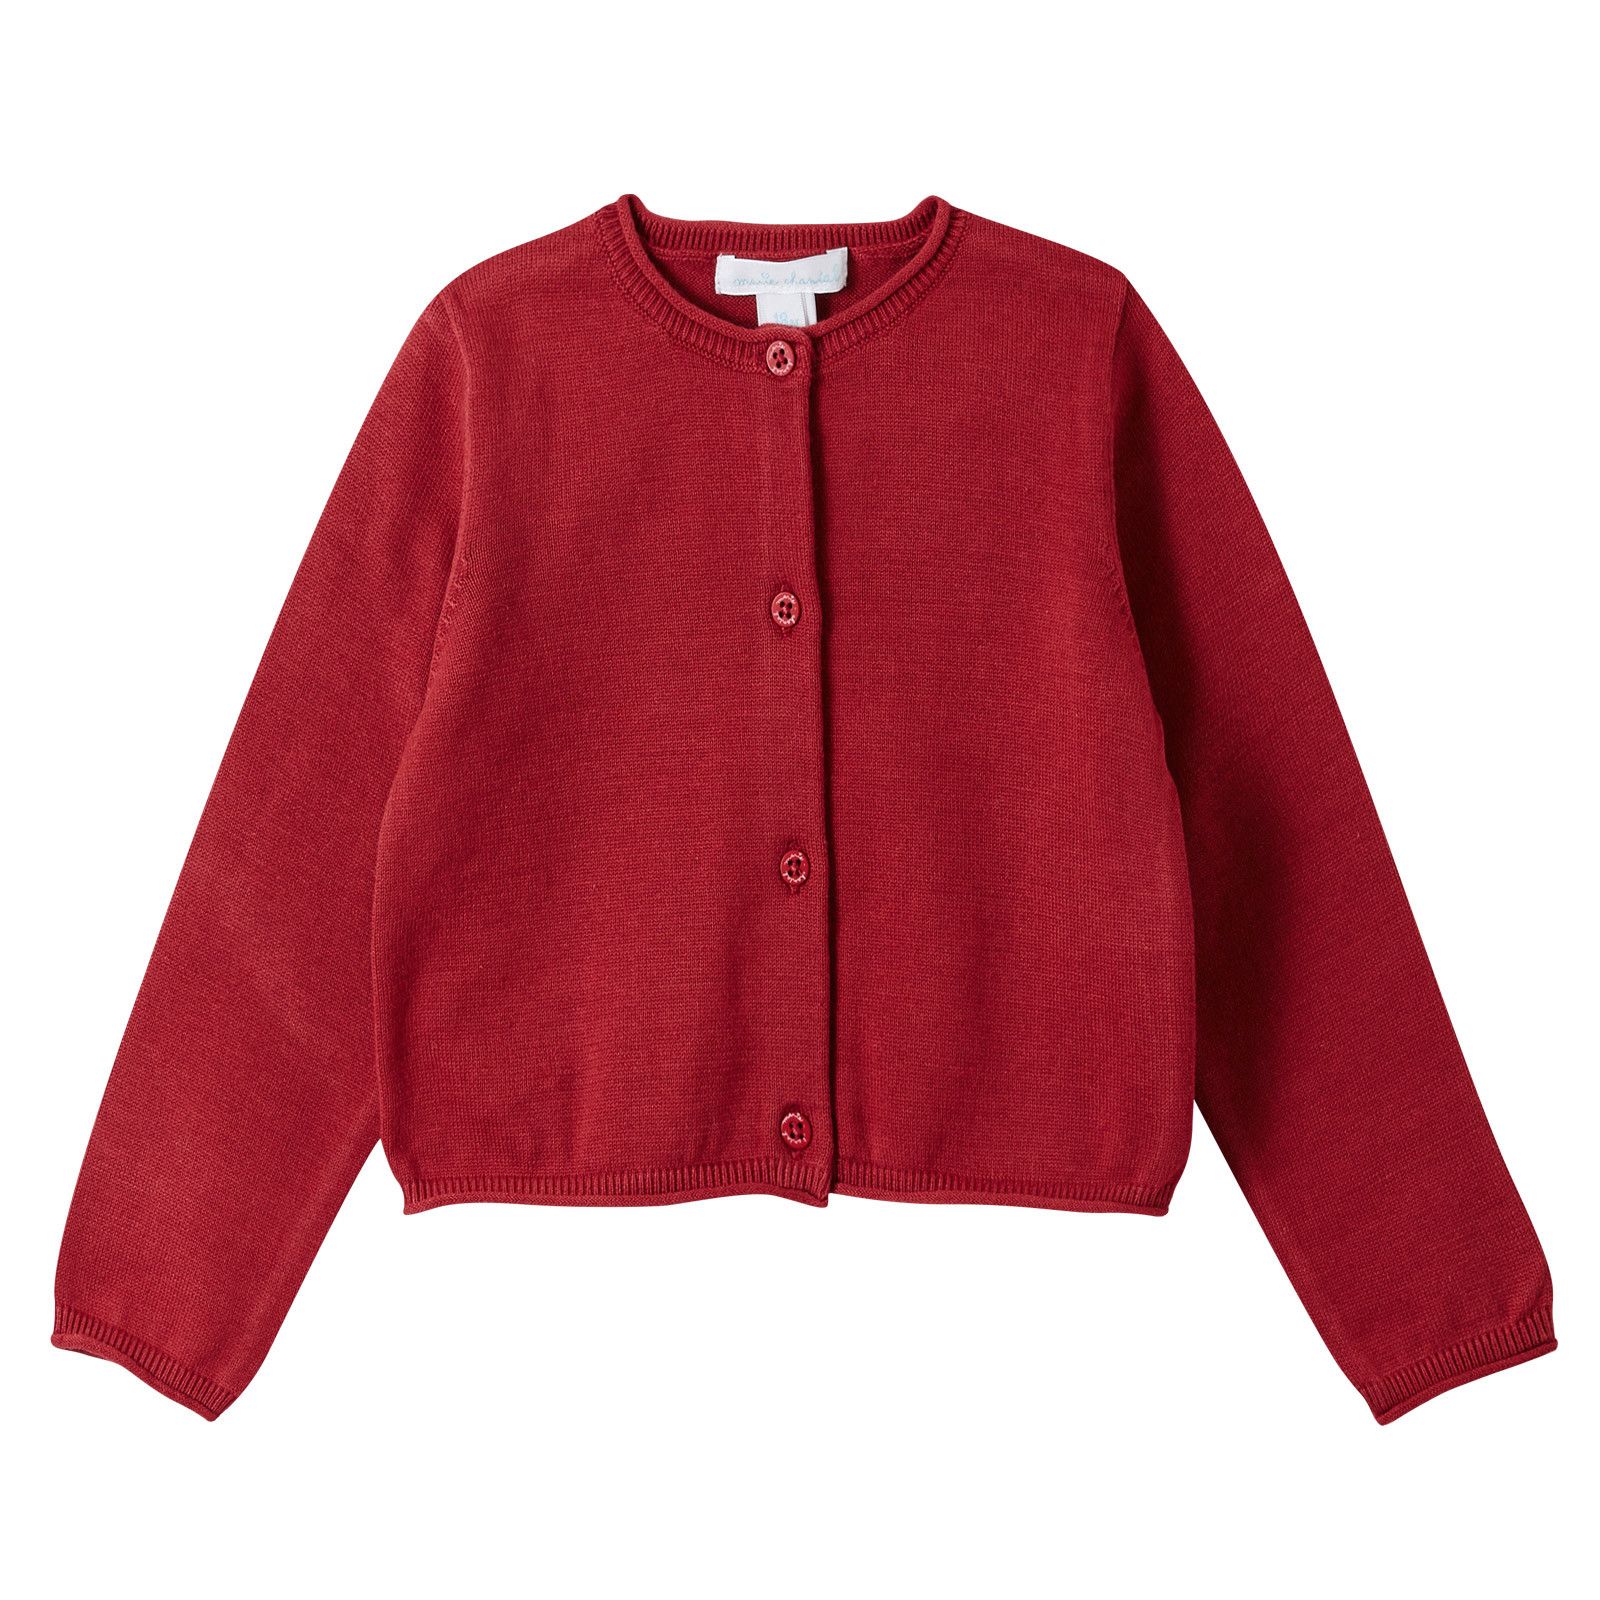 Baby Girls Red Cotton Knitted Cardigan - CÉMAROSE | Children's Fashion Store - 1